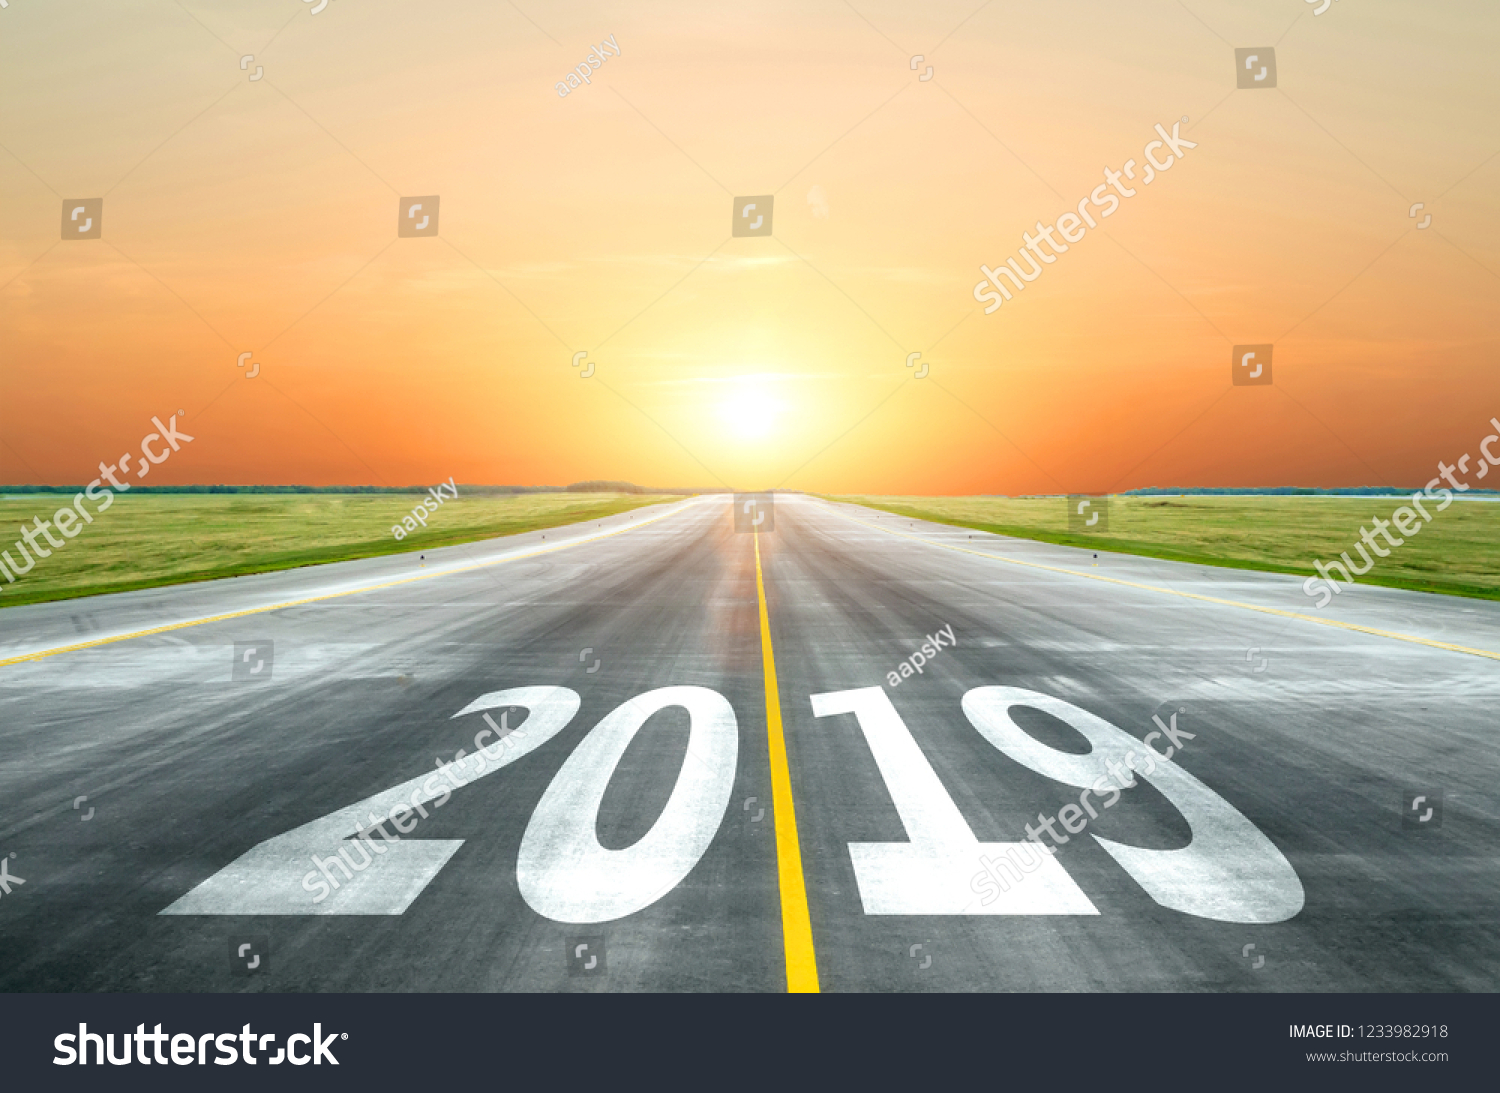 View of the peaceful open road against the setting sun forward to new 2019 year. Concept of success in the future #1233982918